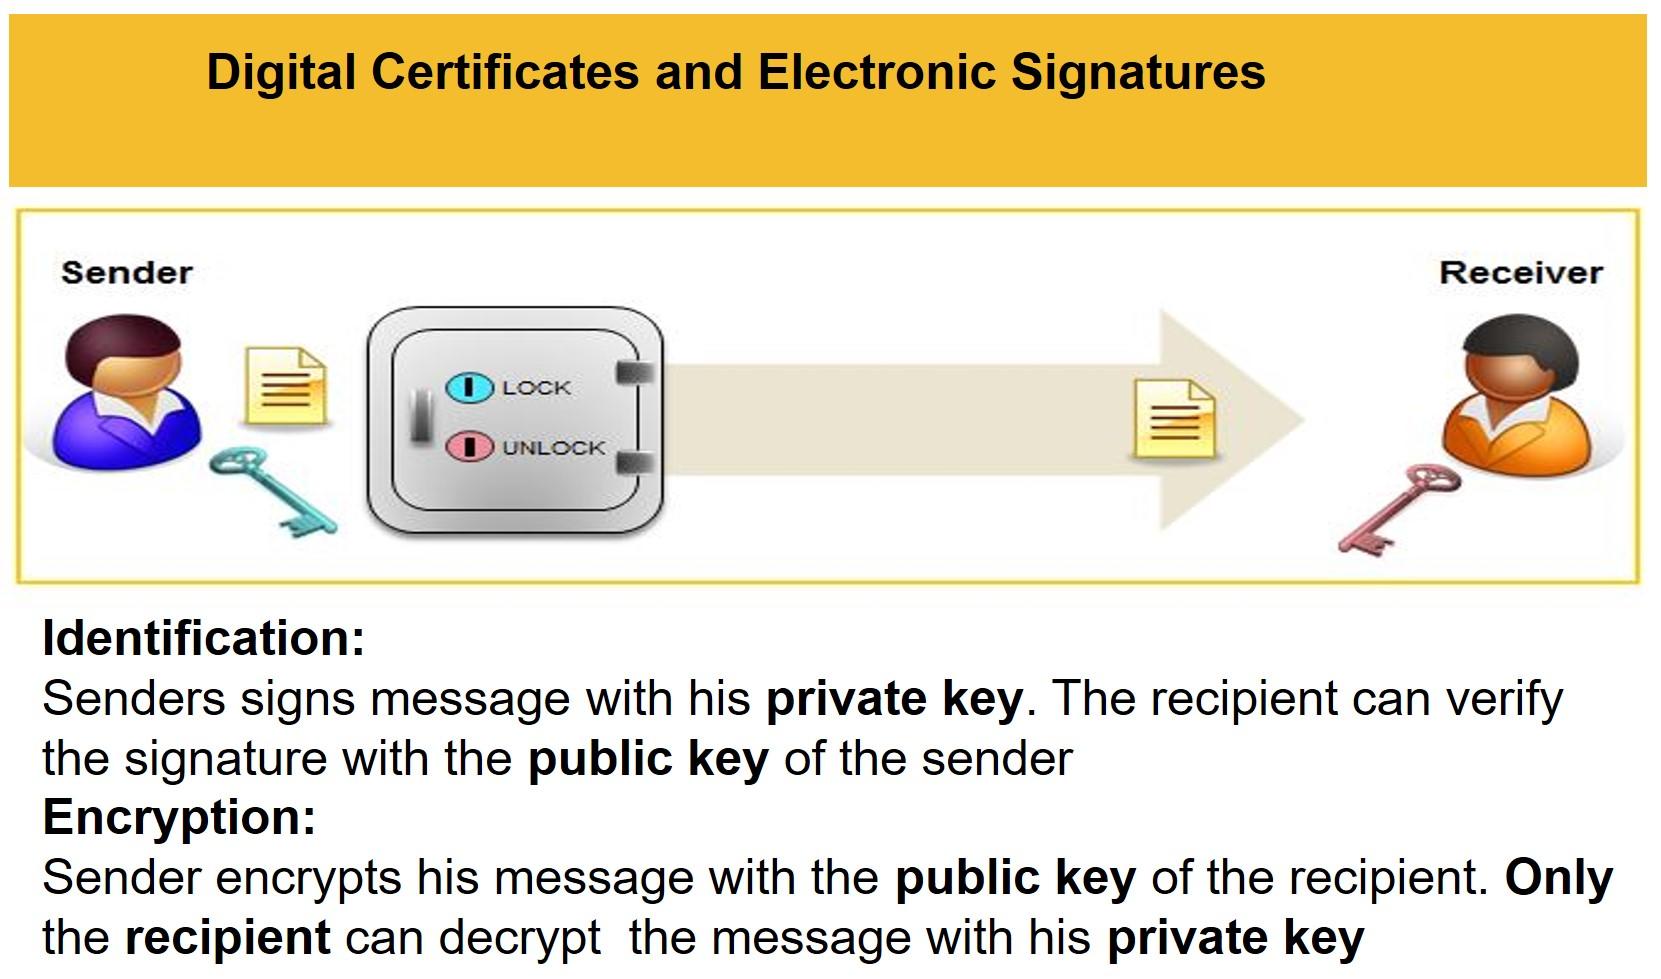 Digital Certificates and Electronic Signatures